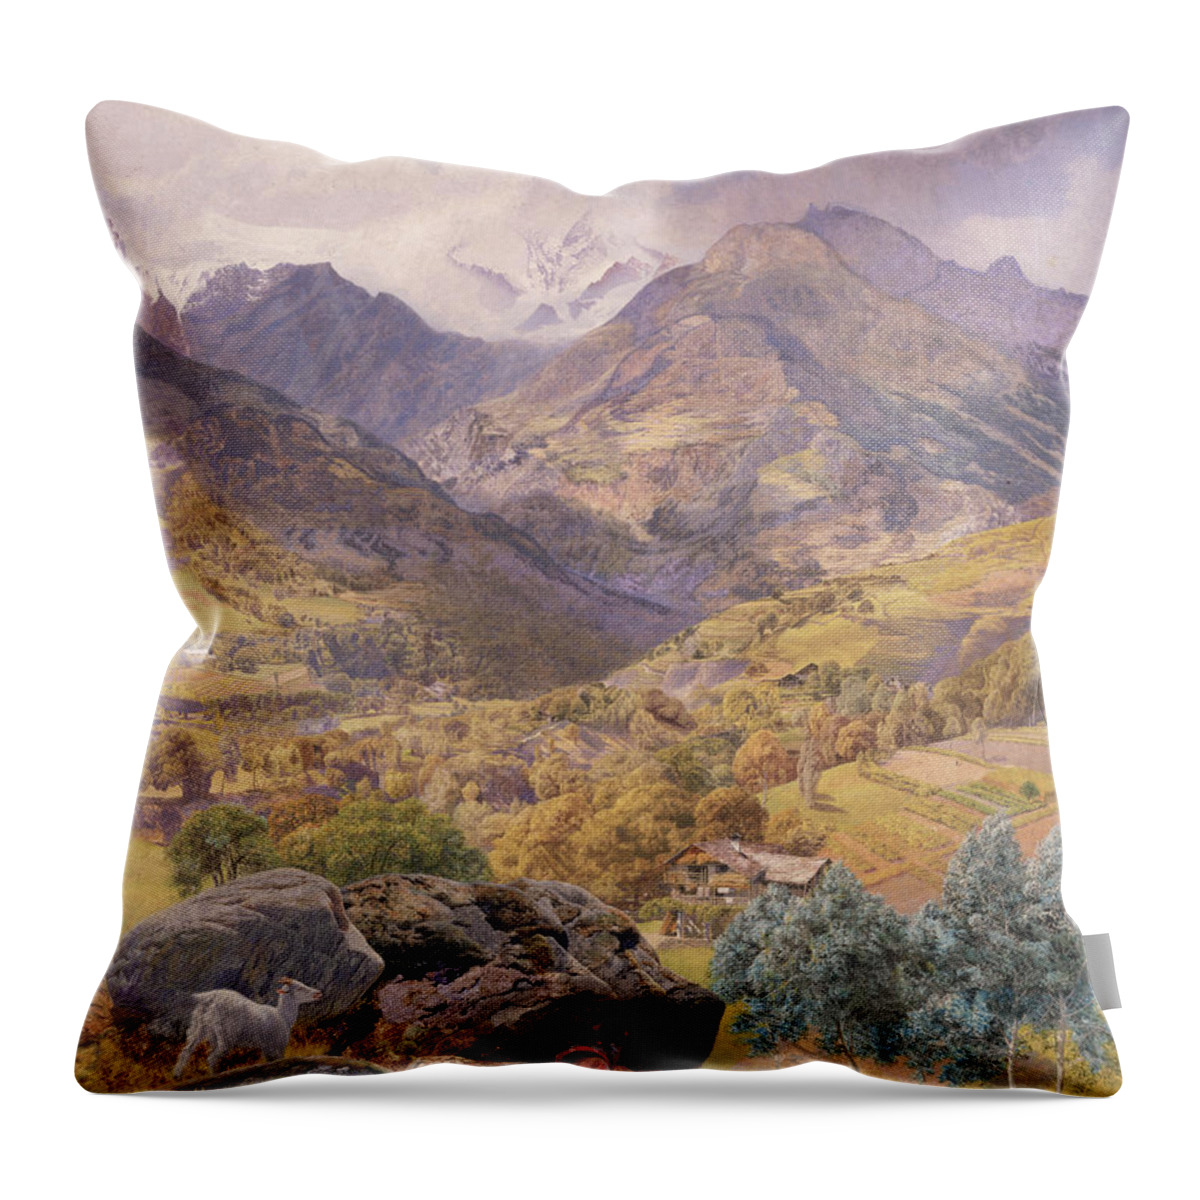 Goat Throw Pillow featuring the painting The Val D'aosta, 1858 by John Brett